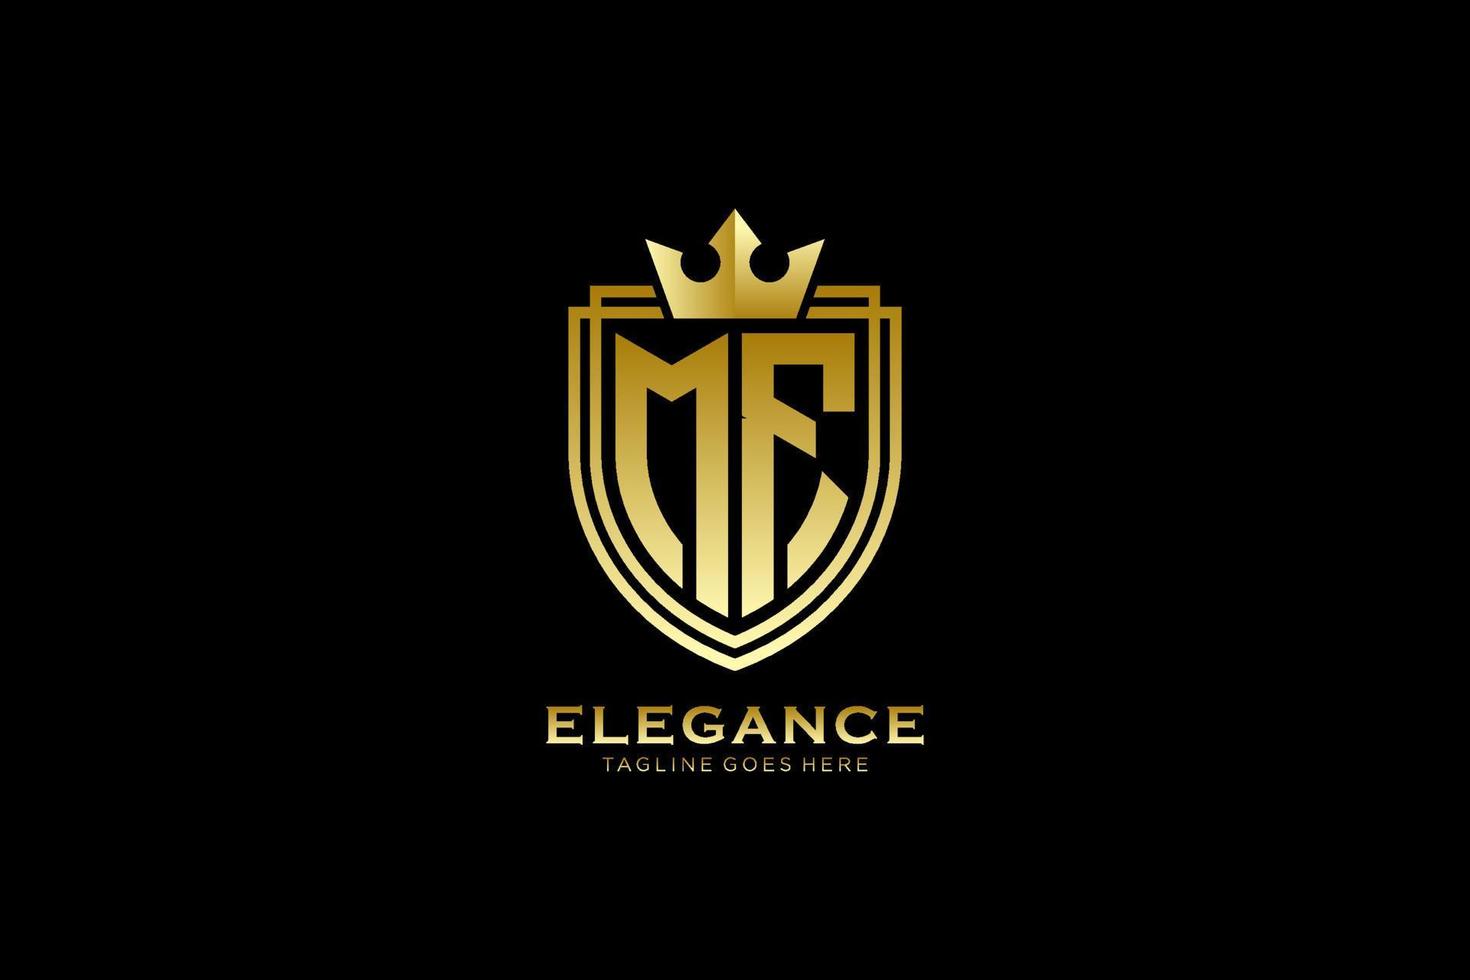 initial MF elegant luxury monogram logo or badge template with scrolls and royal crown - perfect for luxurious branding projects vector